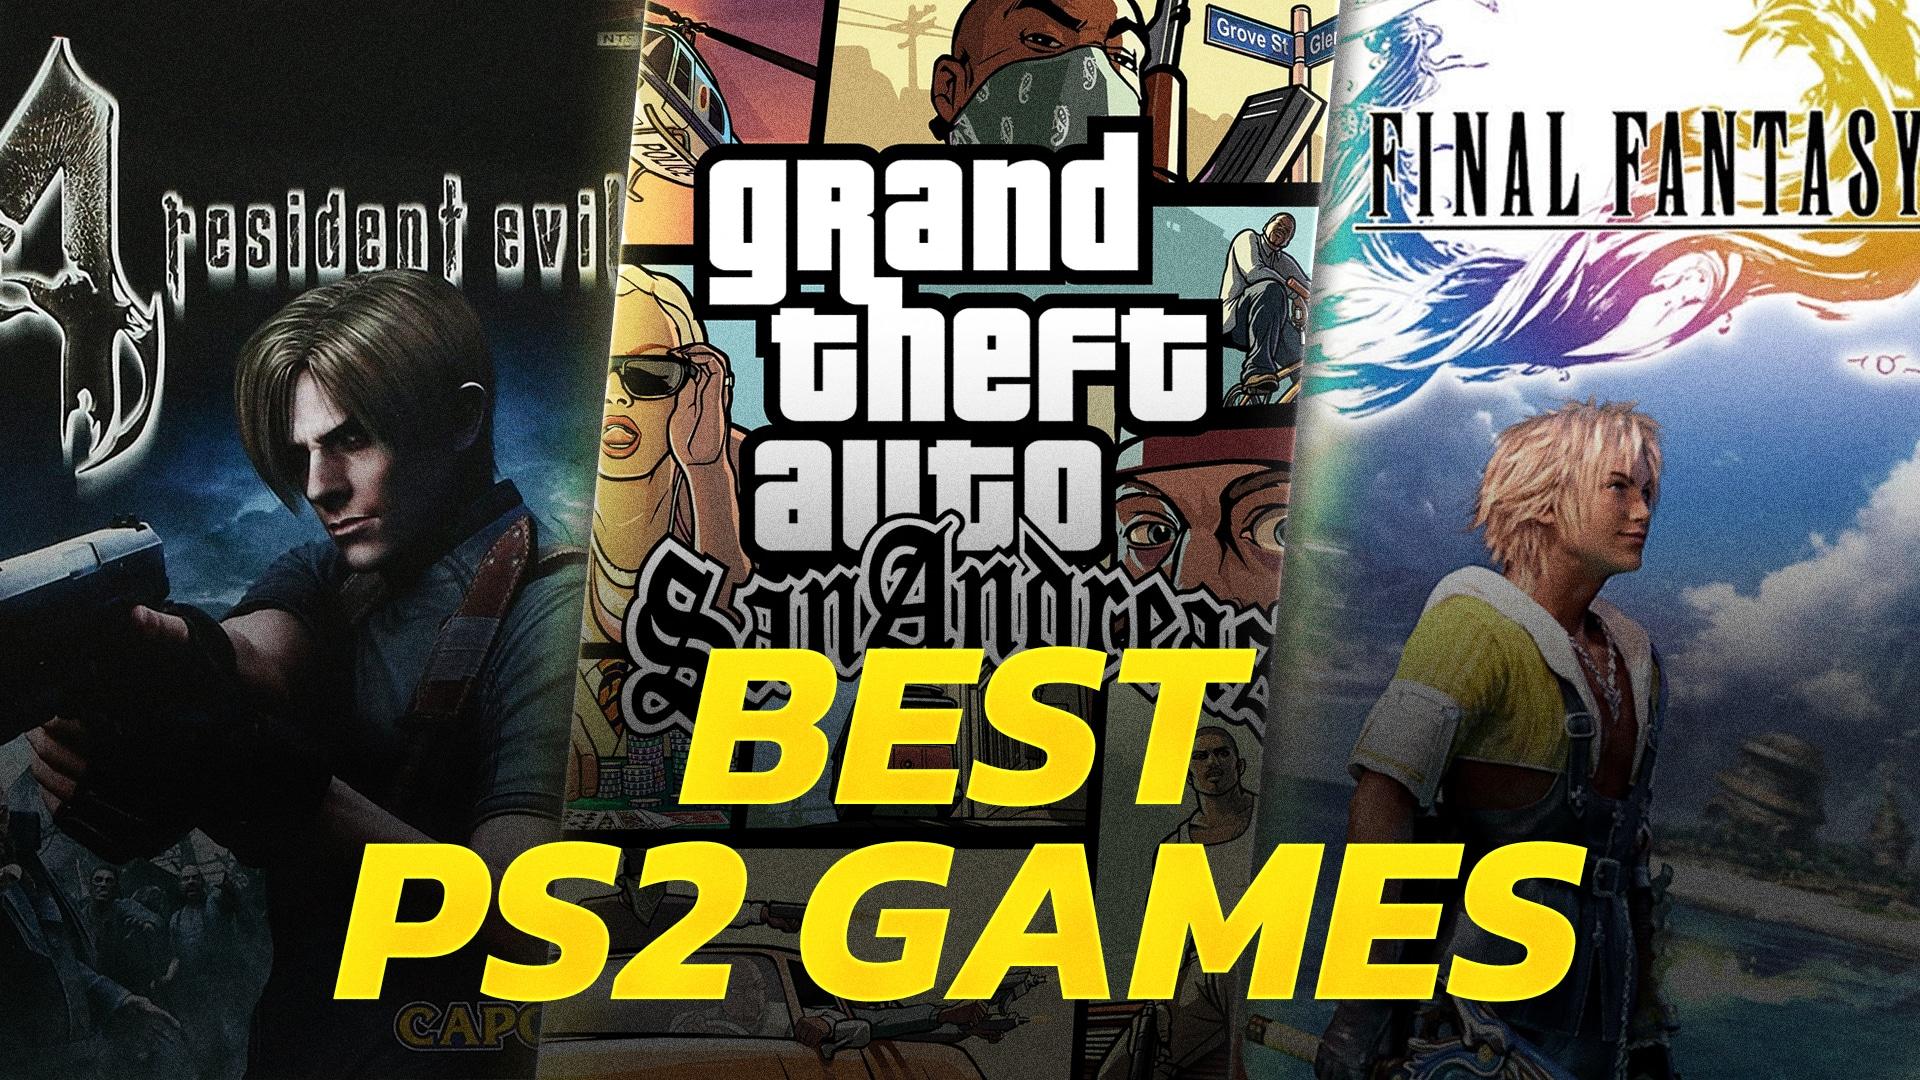 Best PS2 games header showing Resident Evil 4, Grand Theft Auto San Andreas and Final Fantasy X